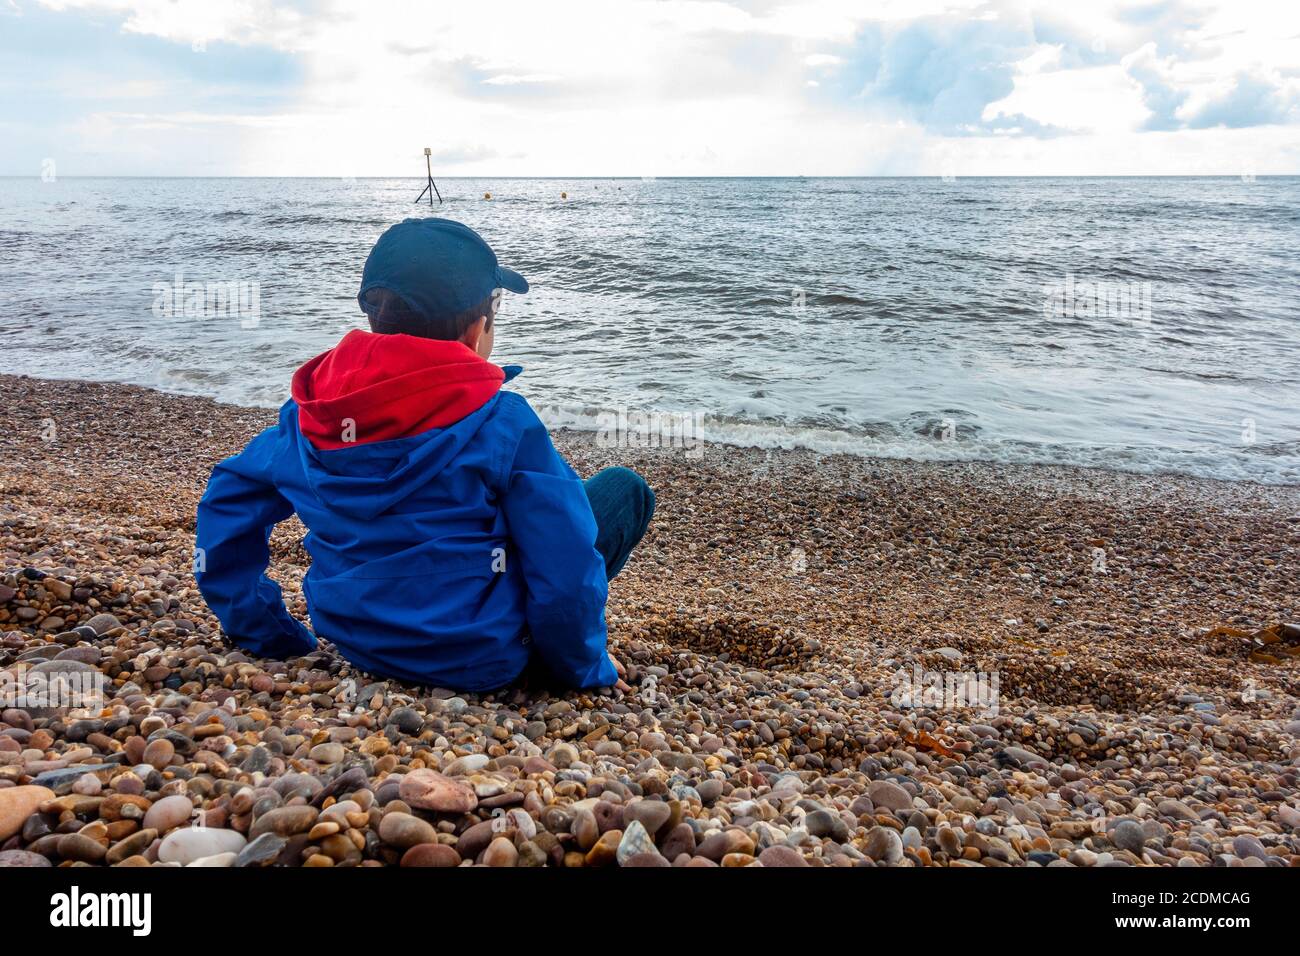 A young boy wearing a waterproof jacket sits on a quiet, pebbly beach at Sidmouth, Devon, UK and looks out to sea. Stock Photo